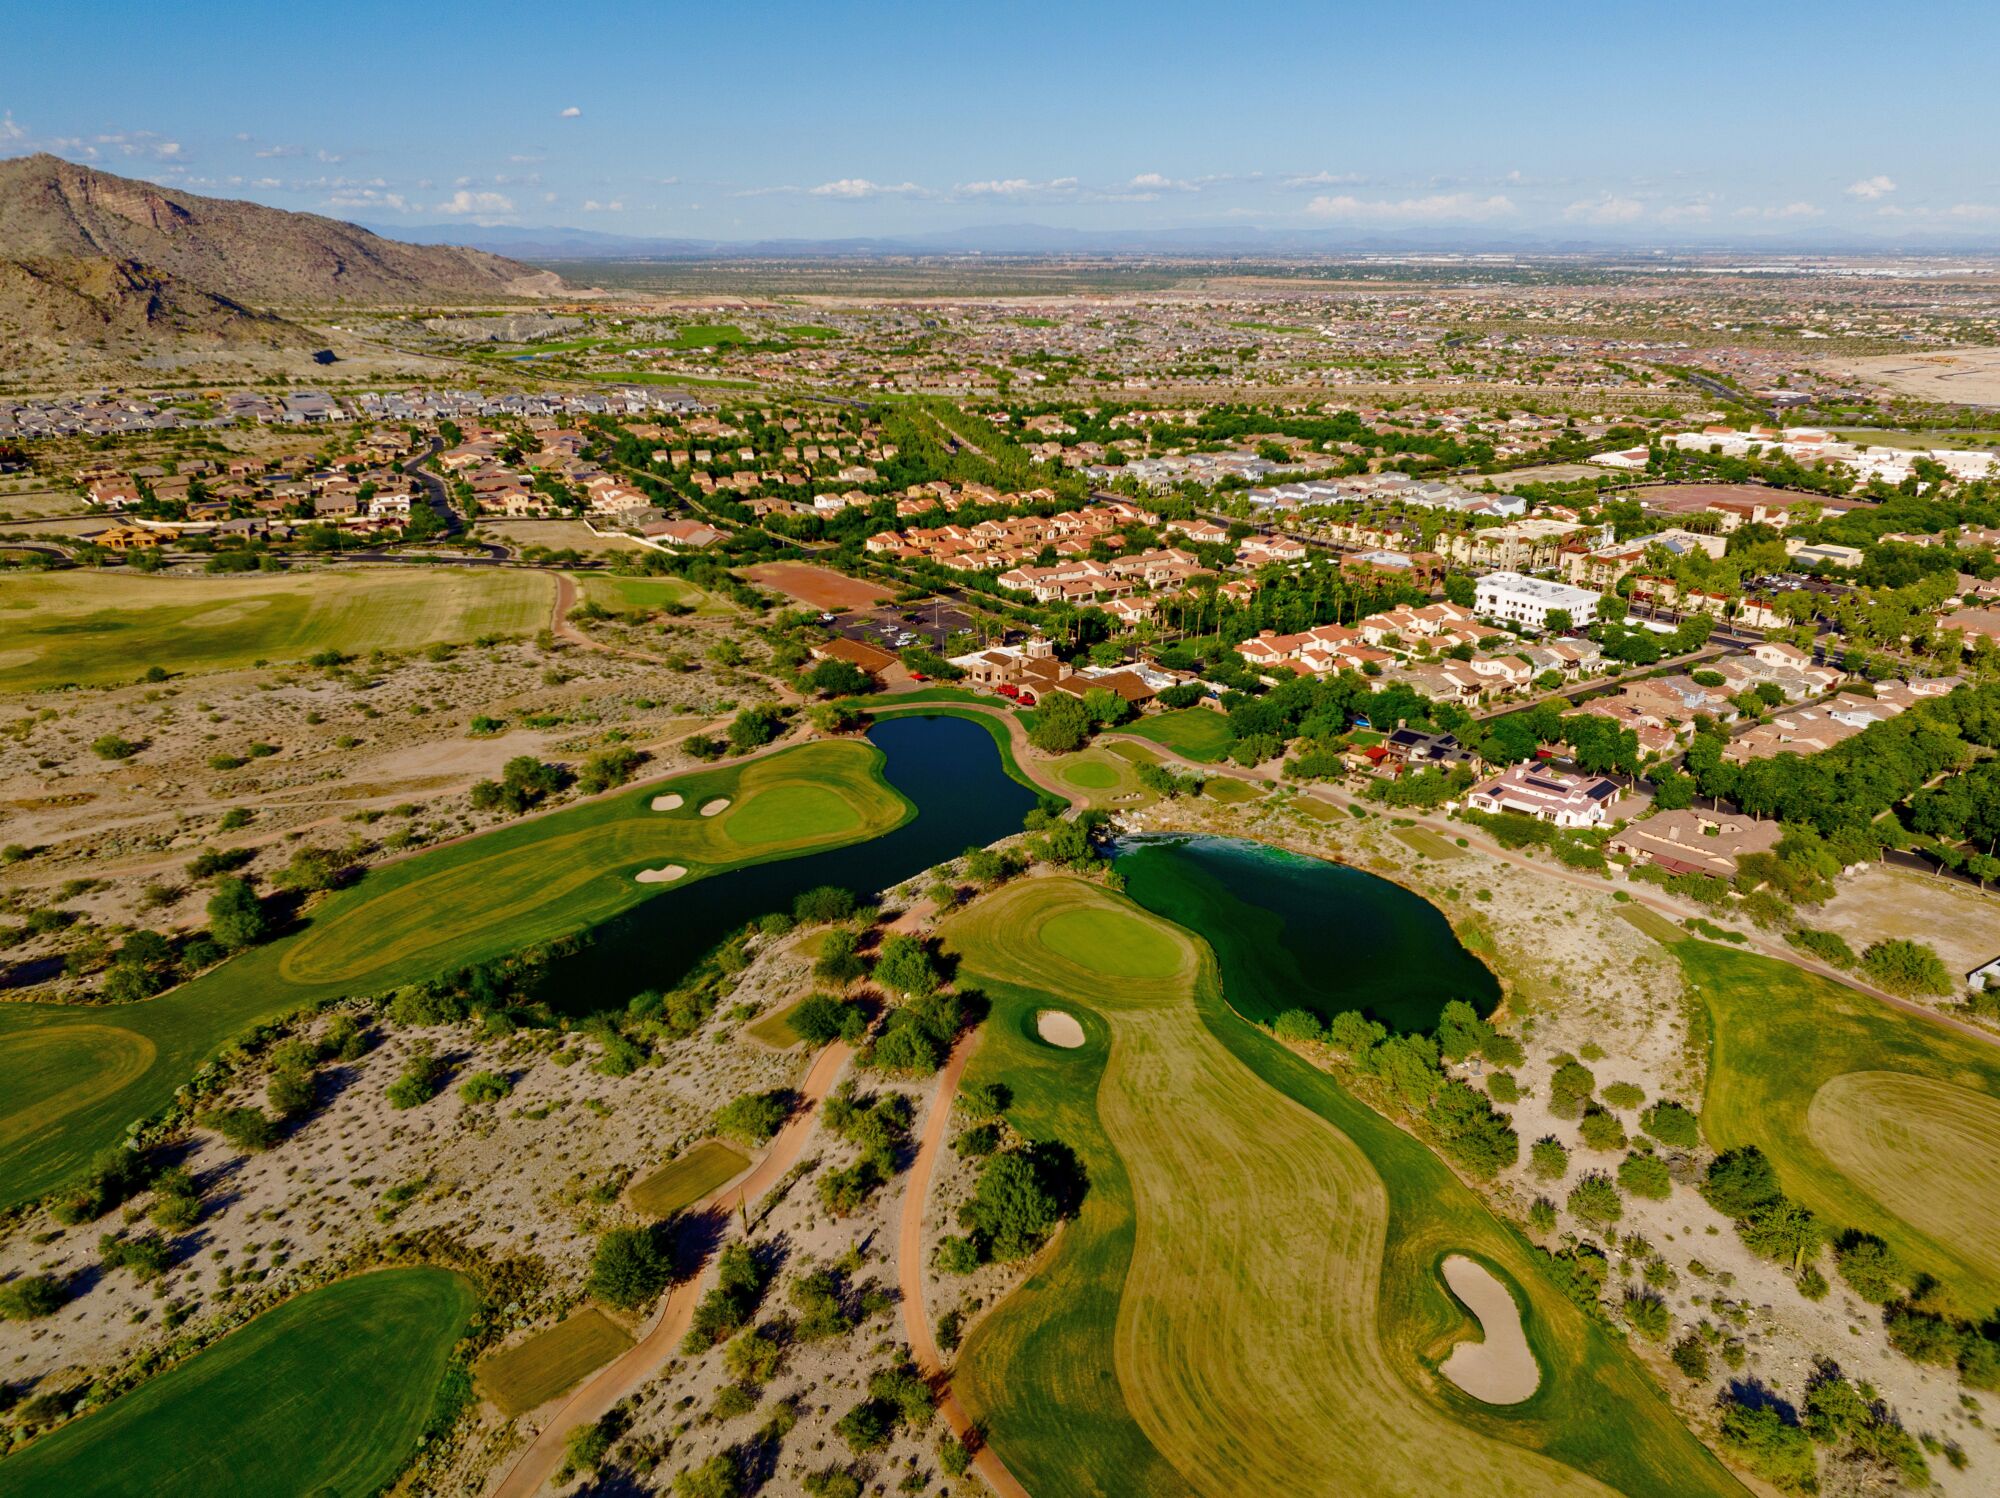 Overhead view of a green golf course surrounded by suburbs